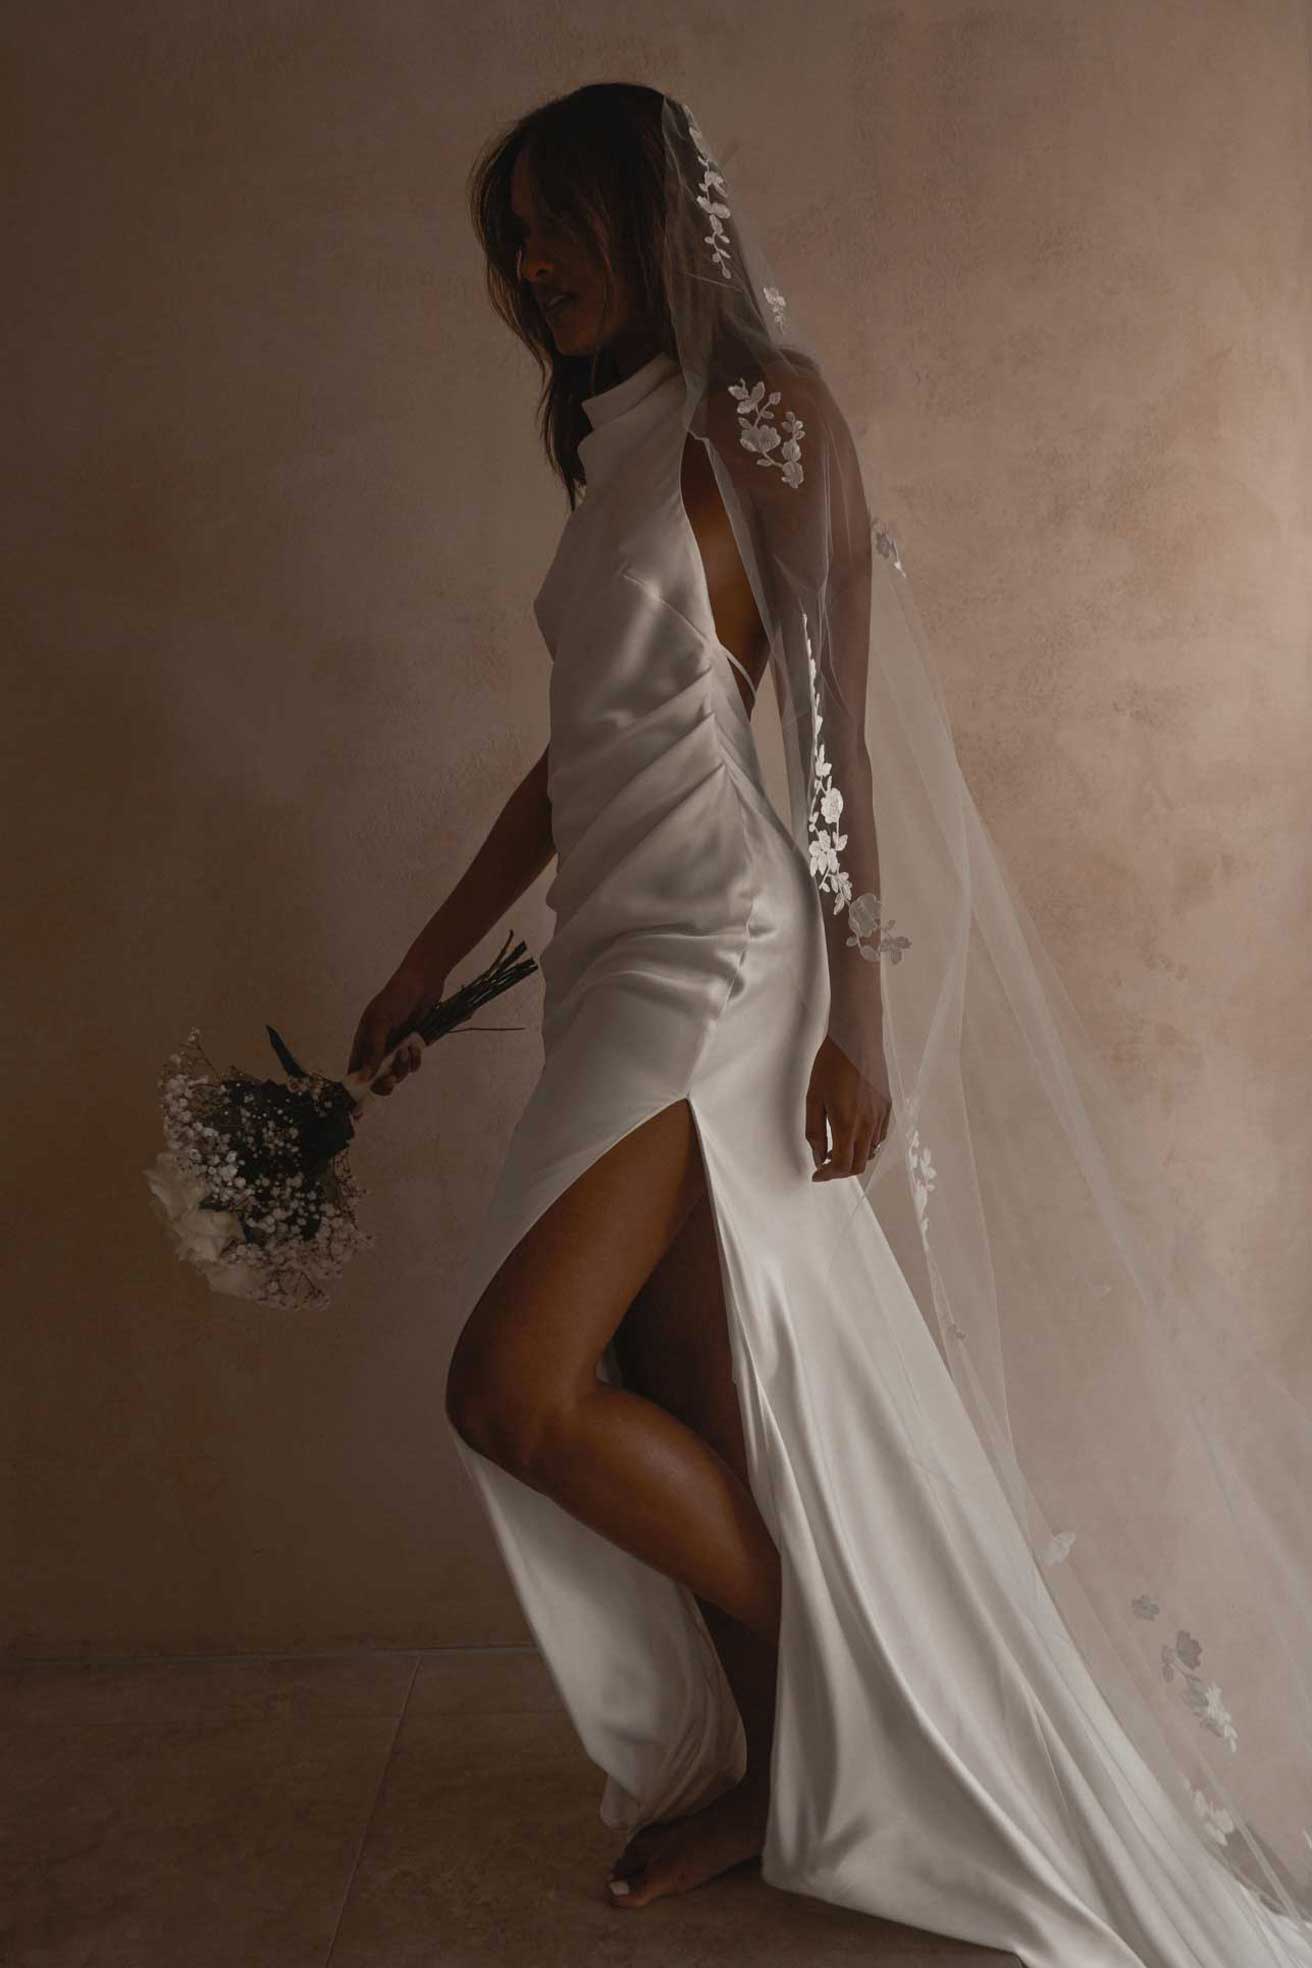 Model wearing Goldie gown and Pierlot veil